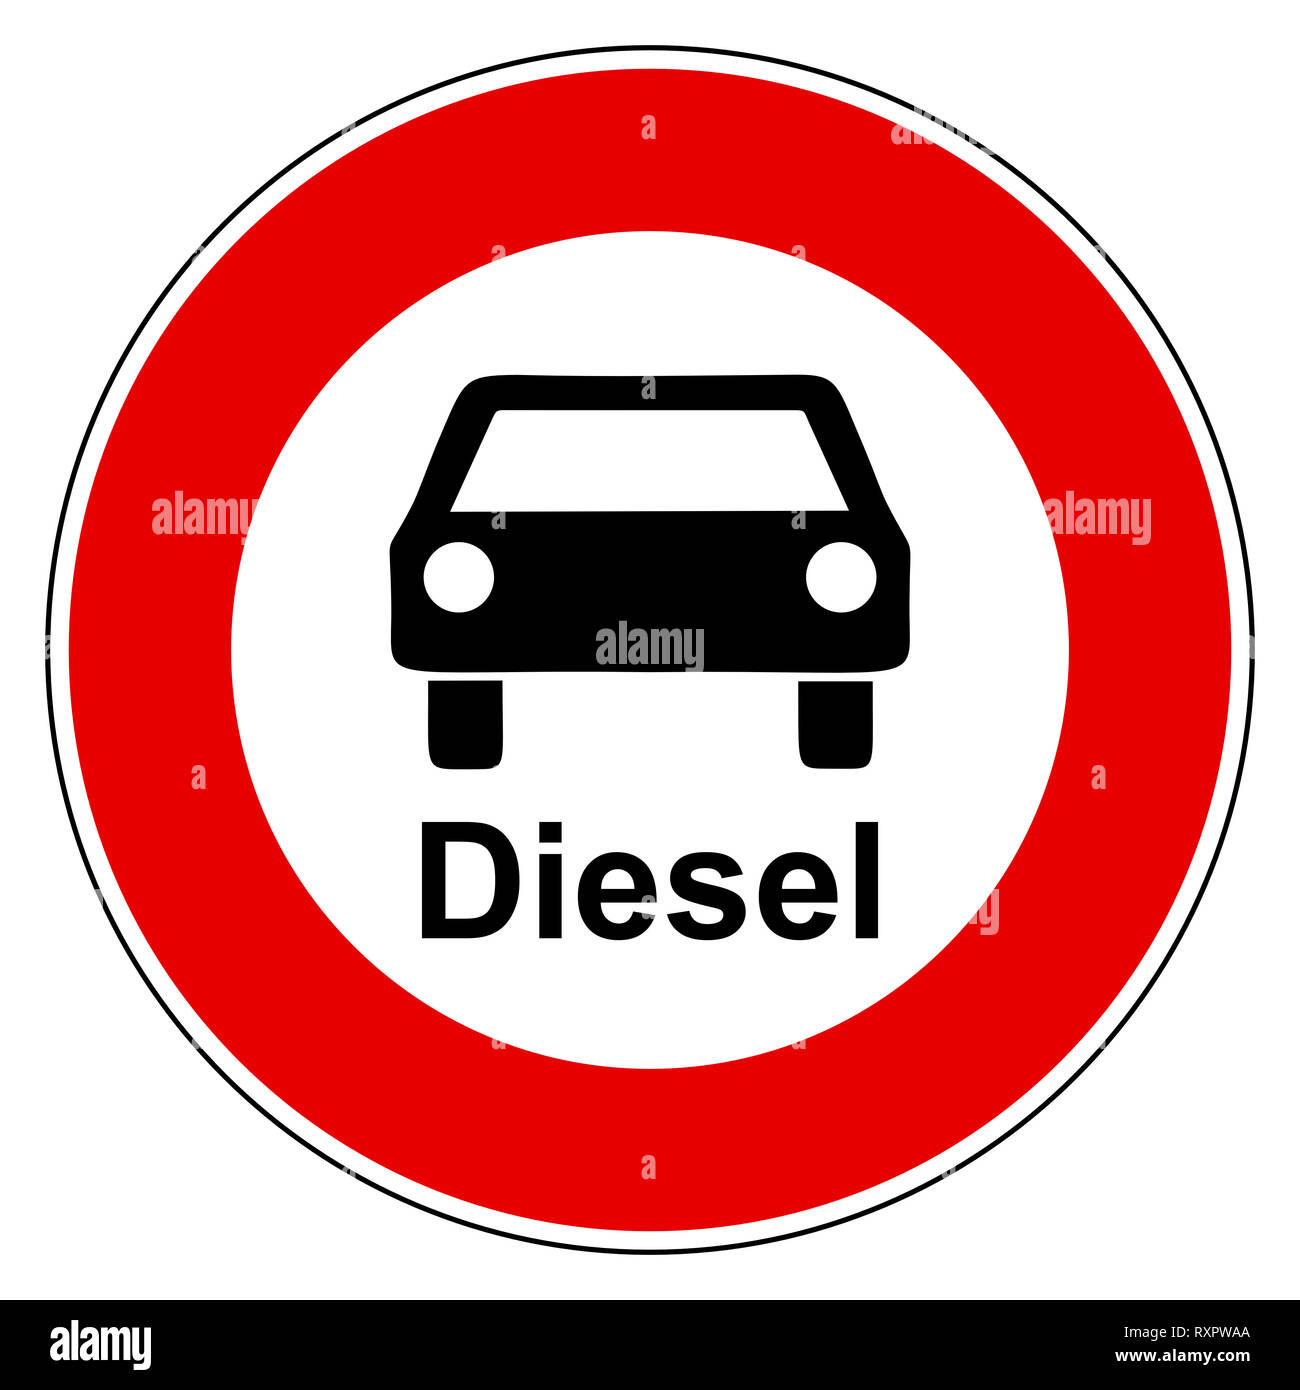 Diesel car and prohibition sign Stock Photo